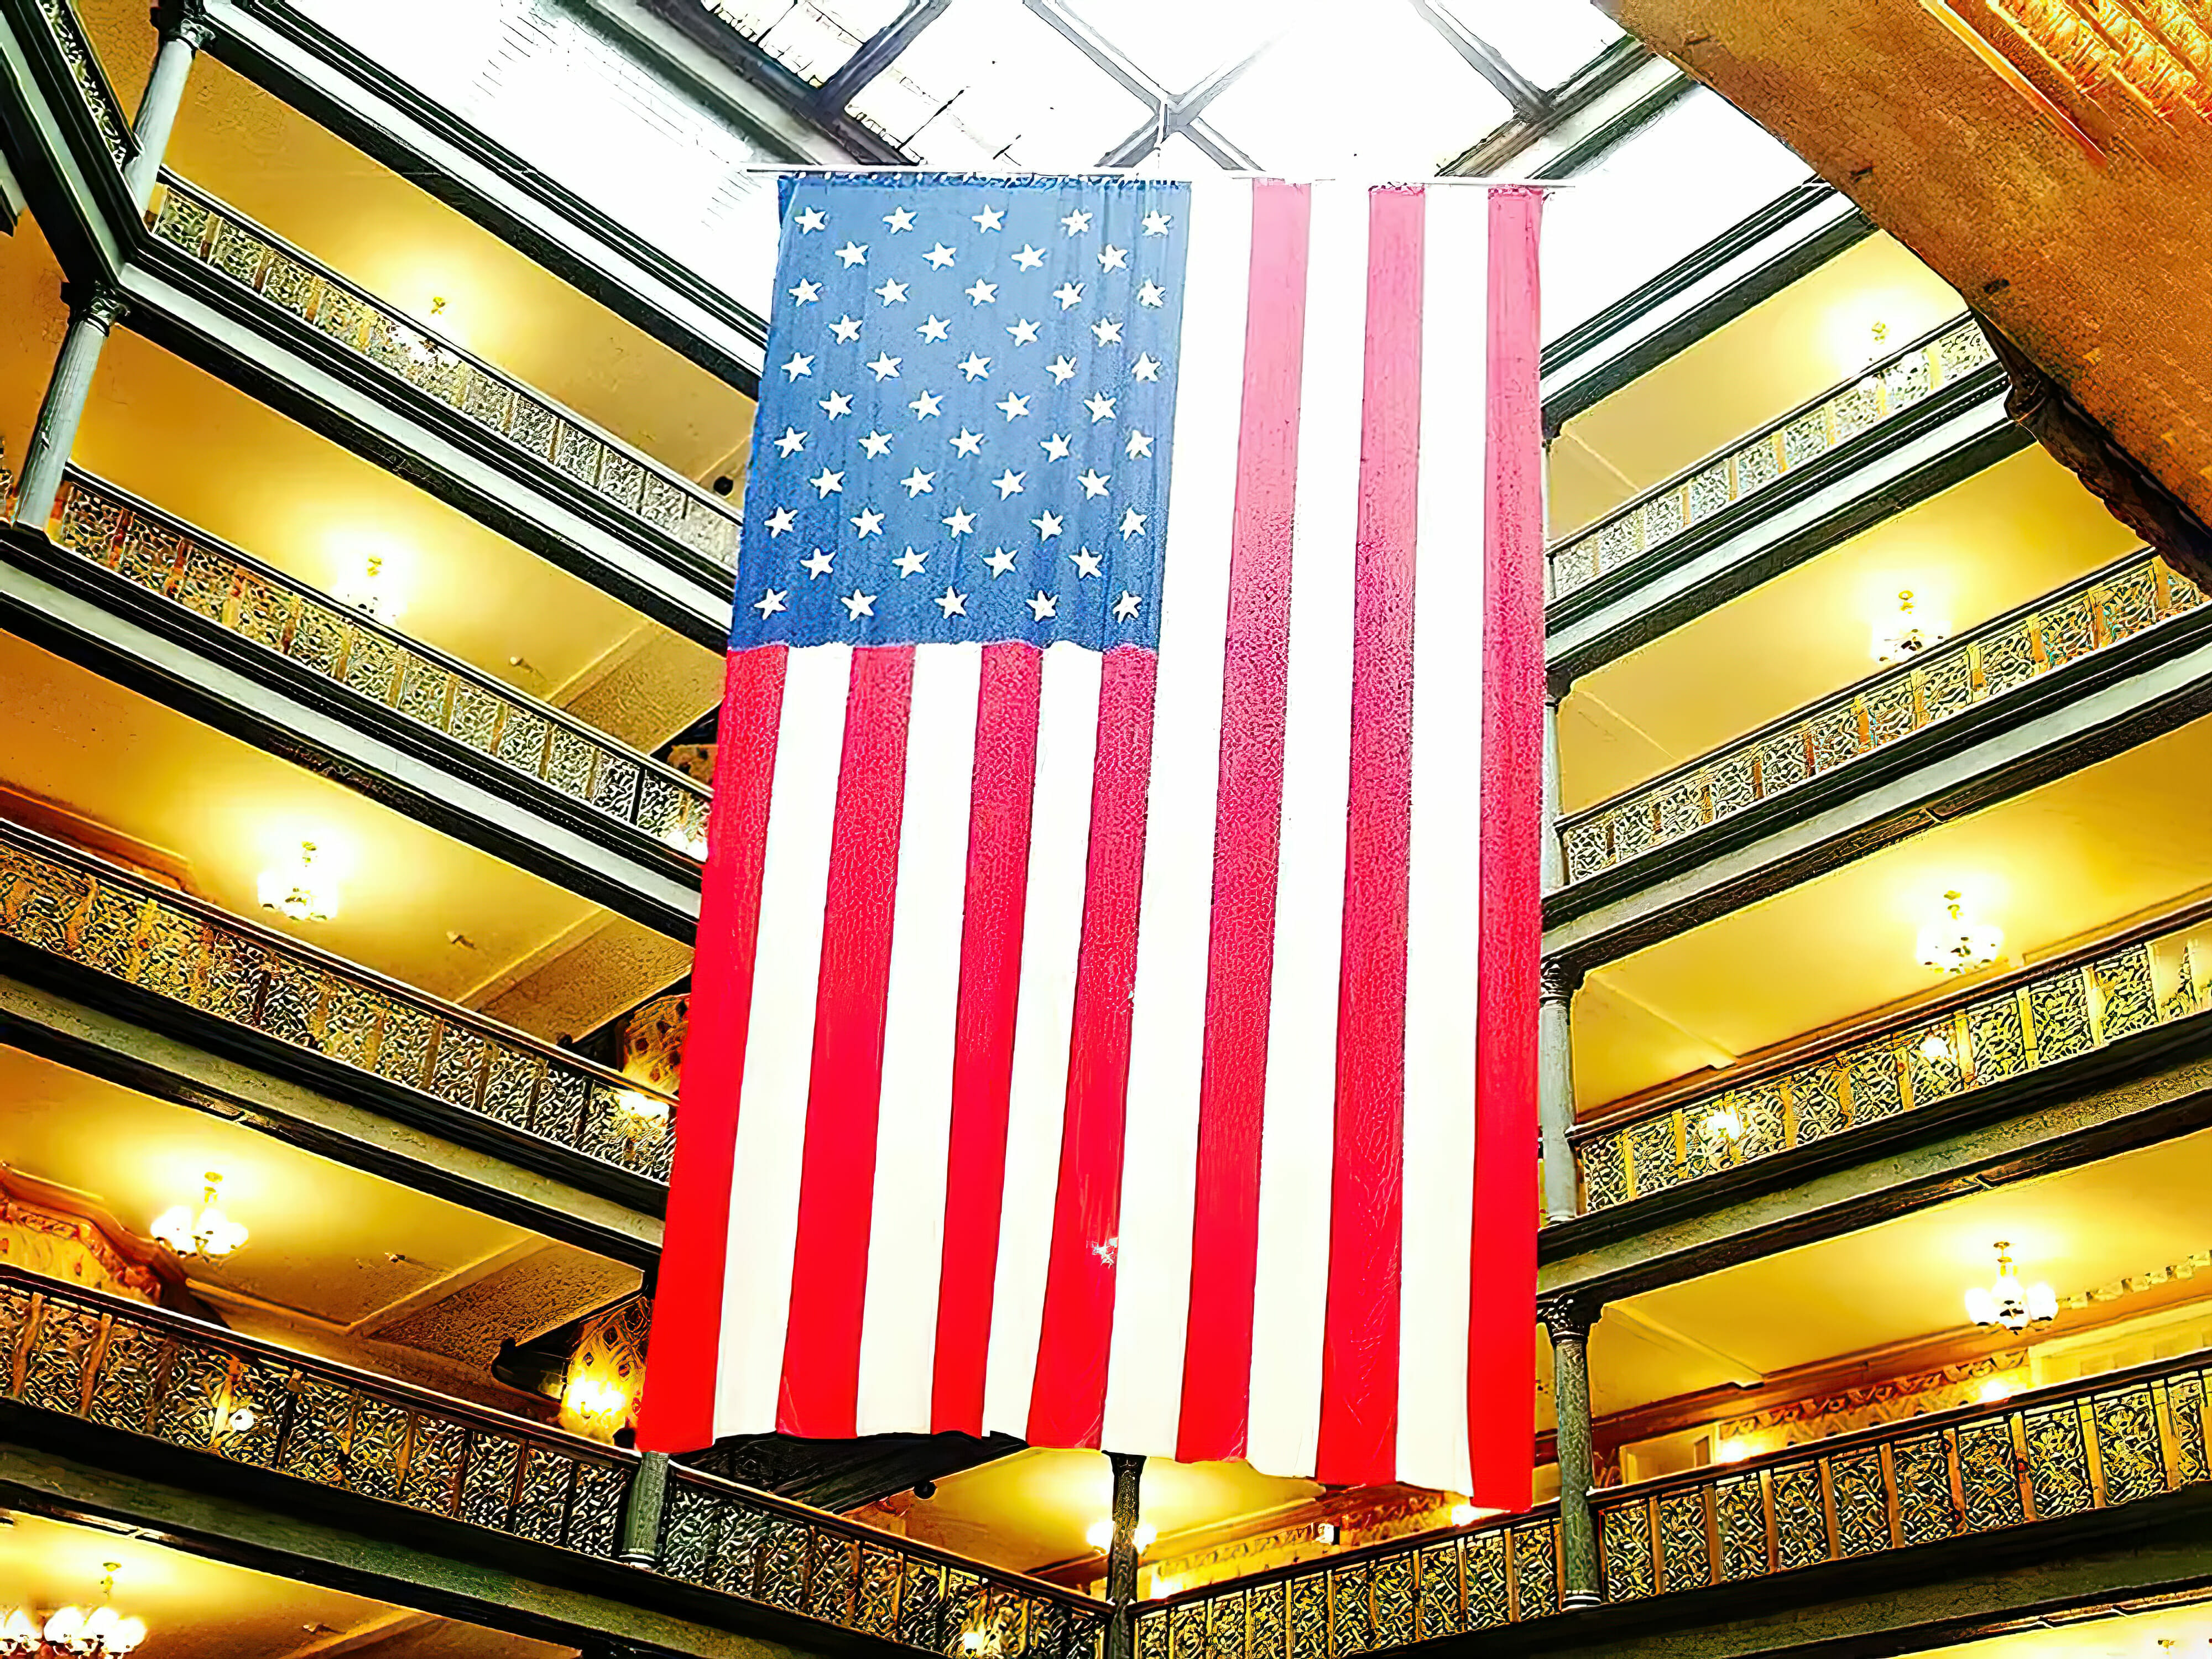 American flag hanging inside a building